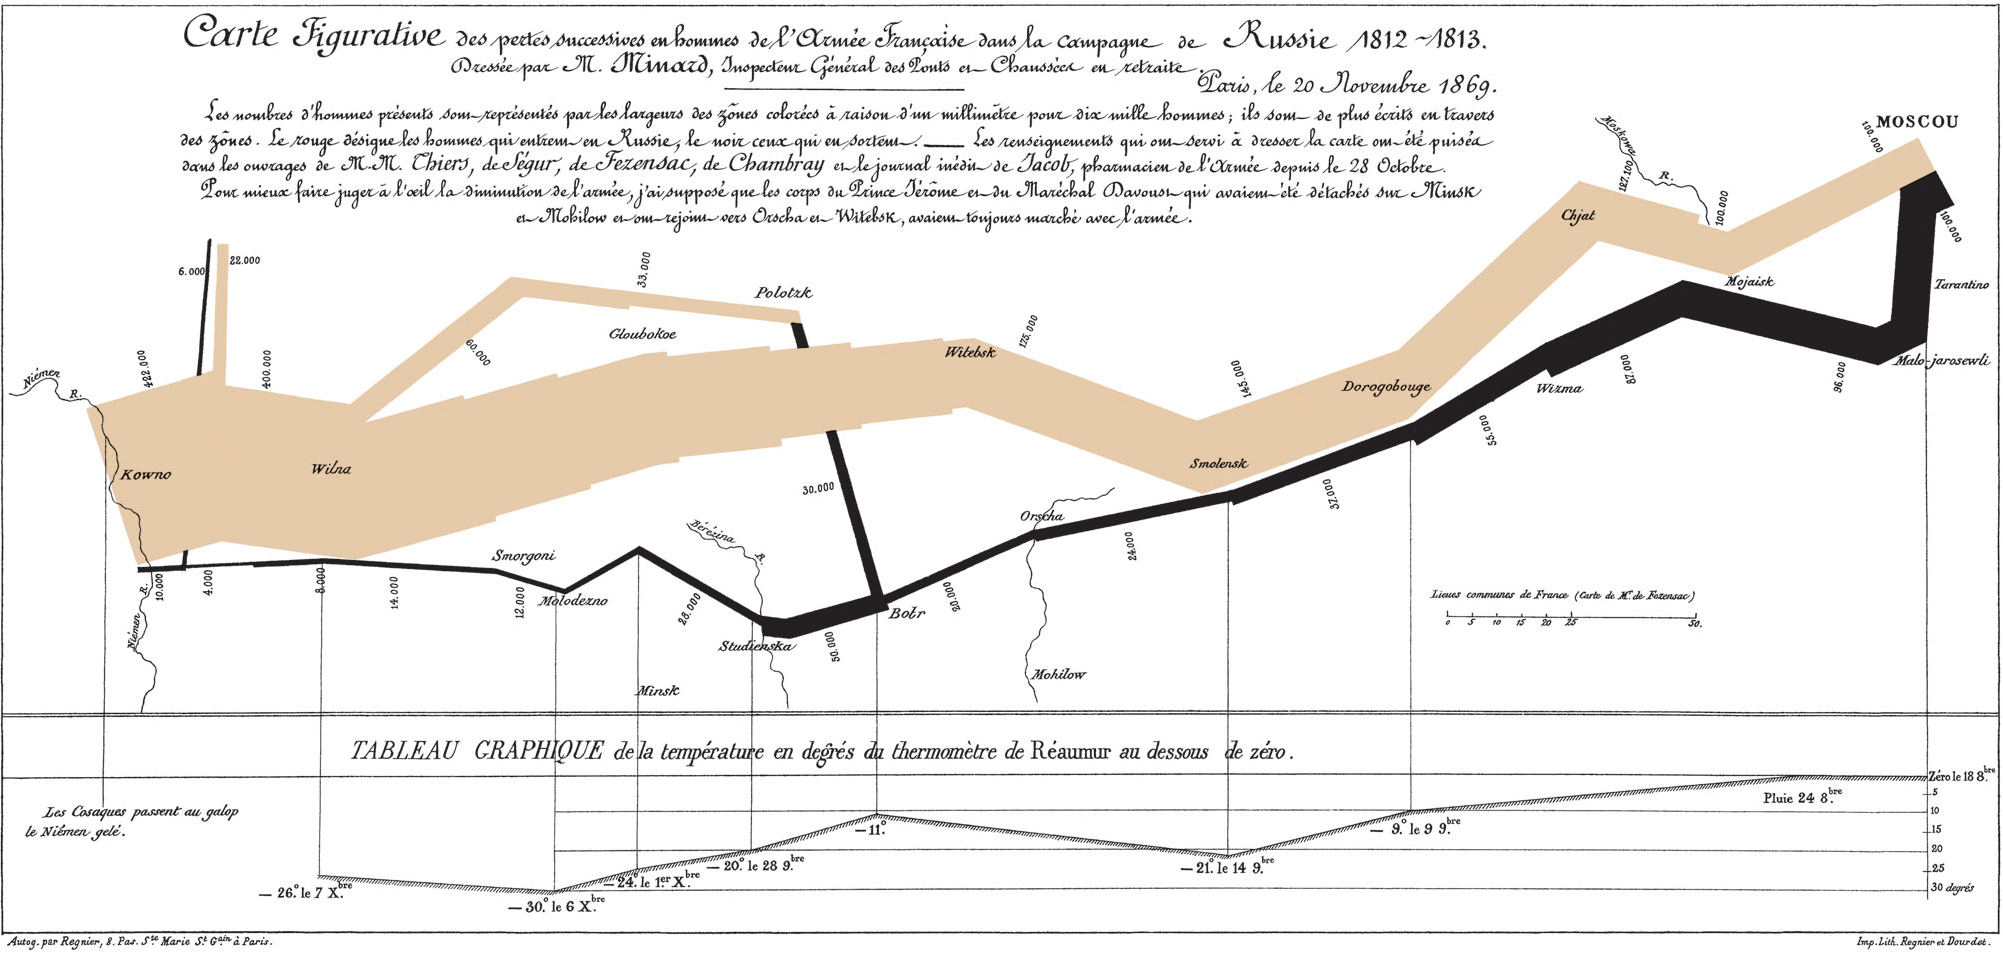 Chart showing Napoleon’s 1812 Russian campaign army, their movements, and temperature on return to France